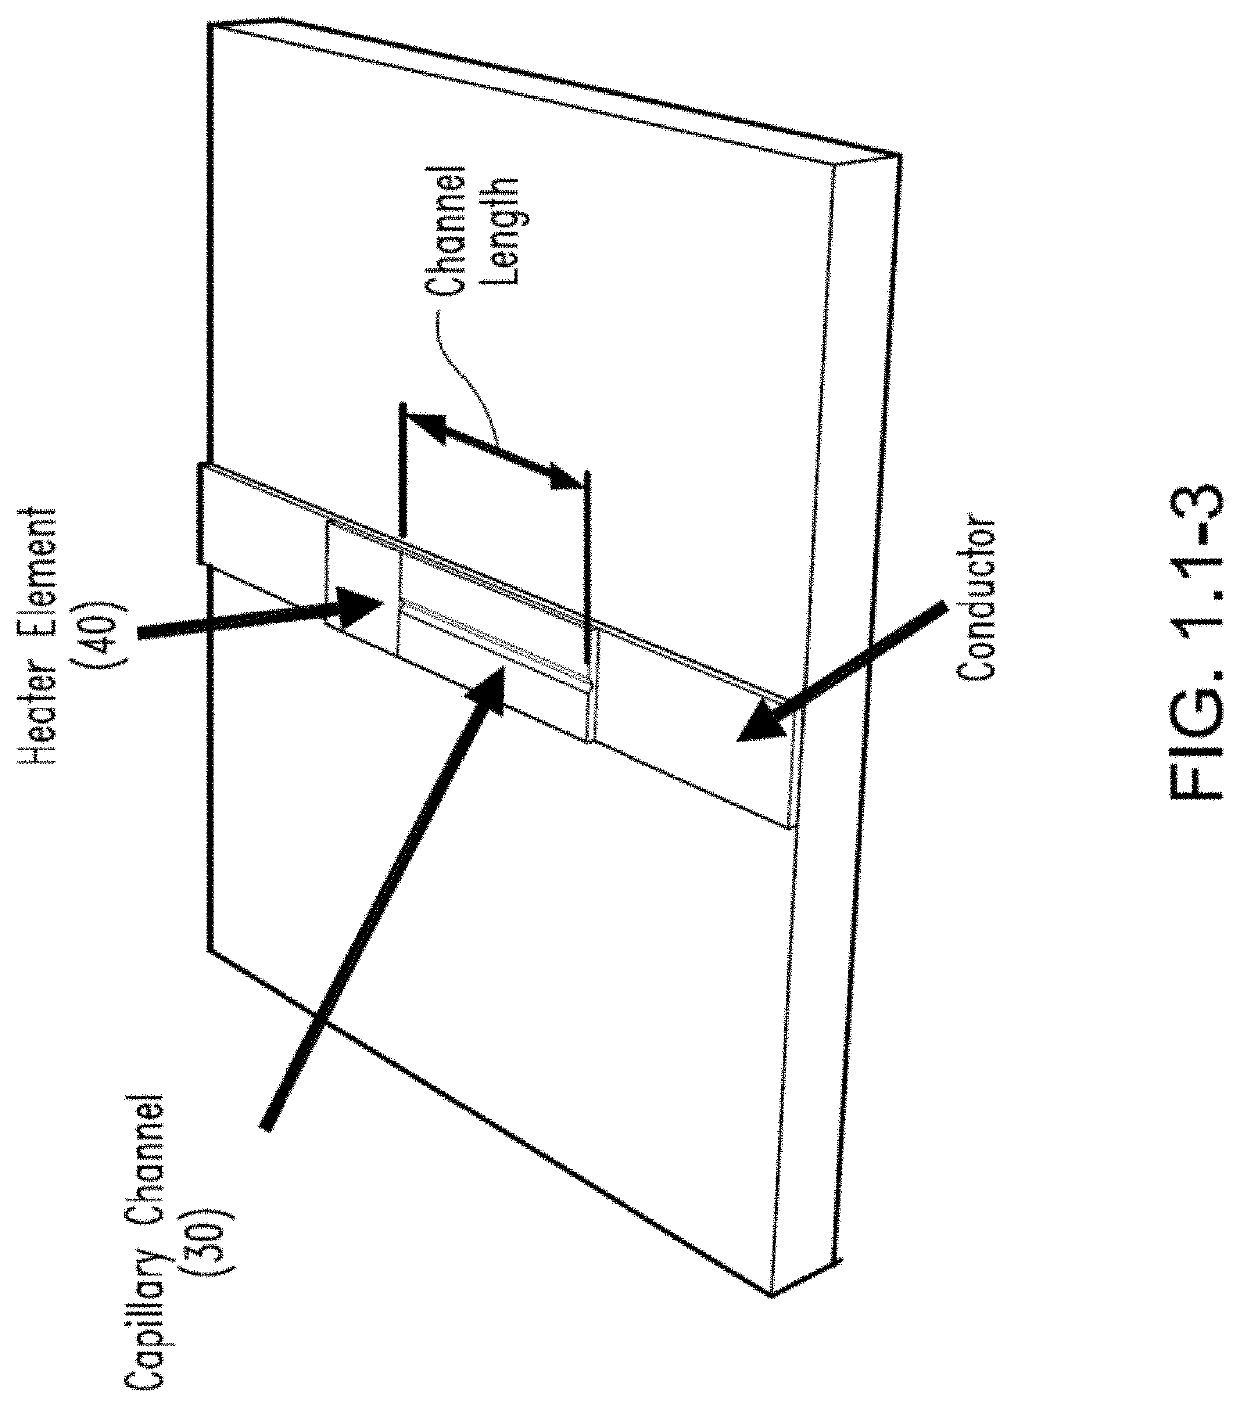 Microelectronic thermal valve